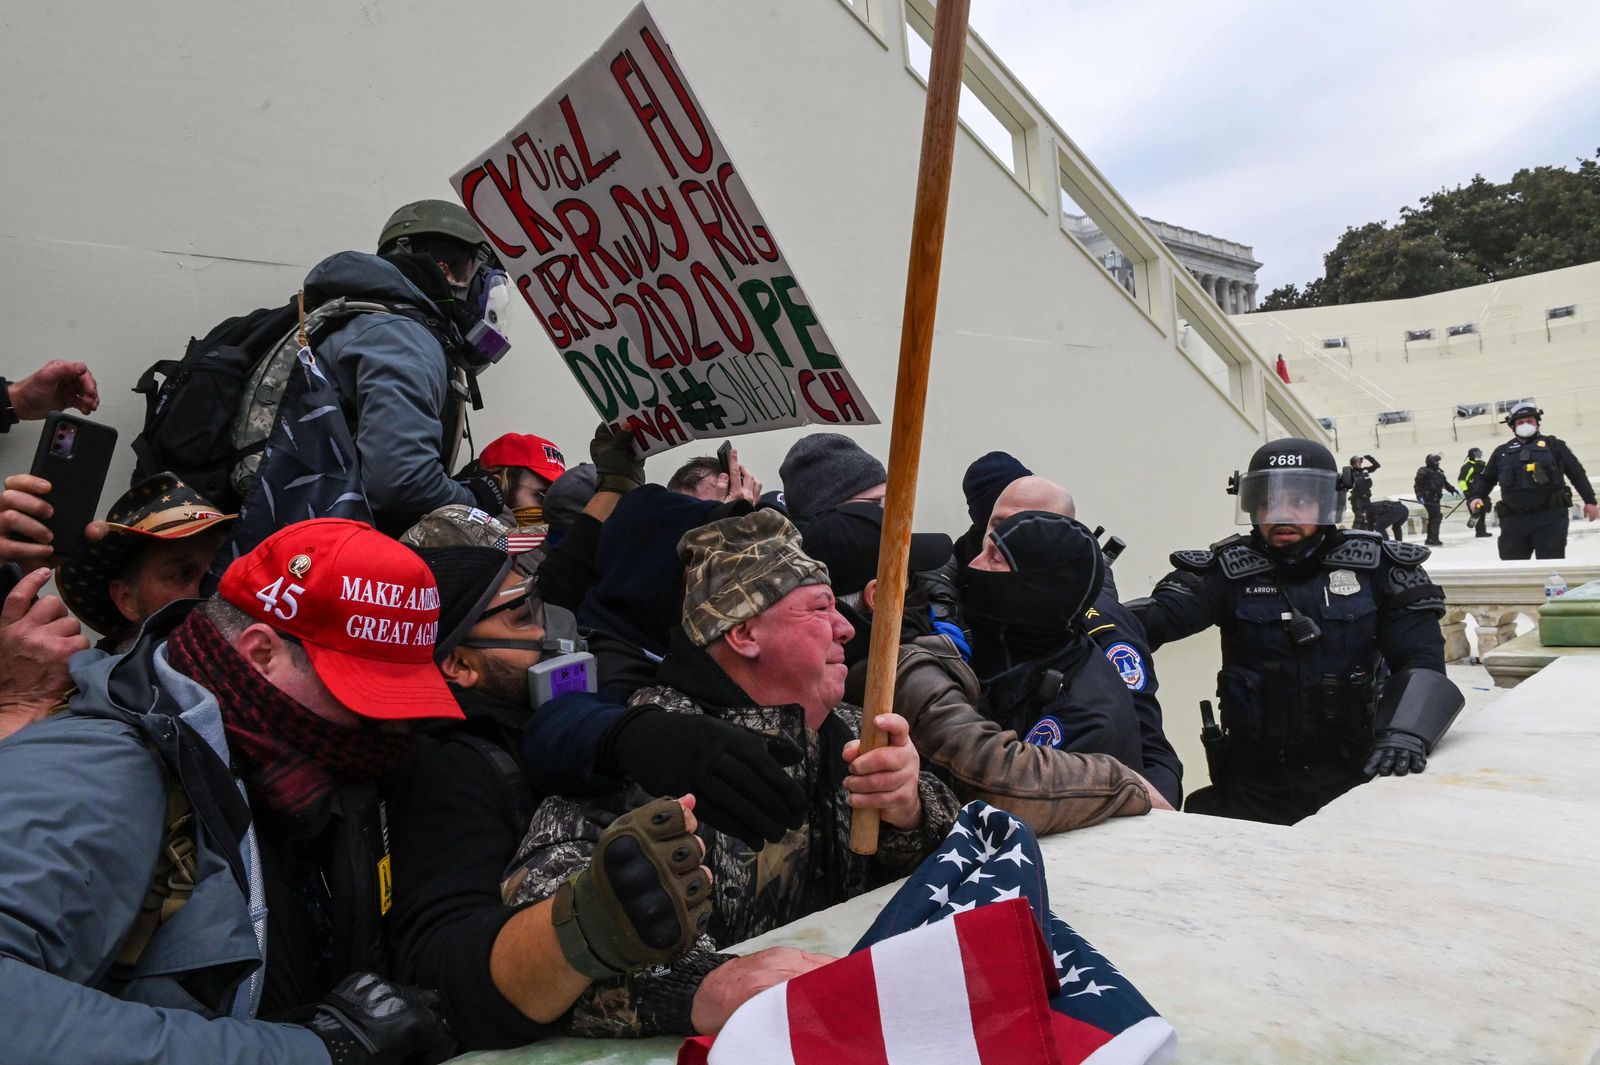 (FILES) In this file photo taken on January 6, 2021 Trump supporters clash with police and security forces as they invade the Inauguration platform of the US Capitol in Washington, DC. - When Donald Trump looks down for the last time from his helicopter over the White House lawn on January 20, 2021, the wreckage of his presidency will be inescapable. The showman with the dyed blond hair, fake tan and a knack for connecting with crowds took office four years ago, making the startling promise in his inaugural speech that he would end 